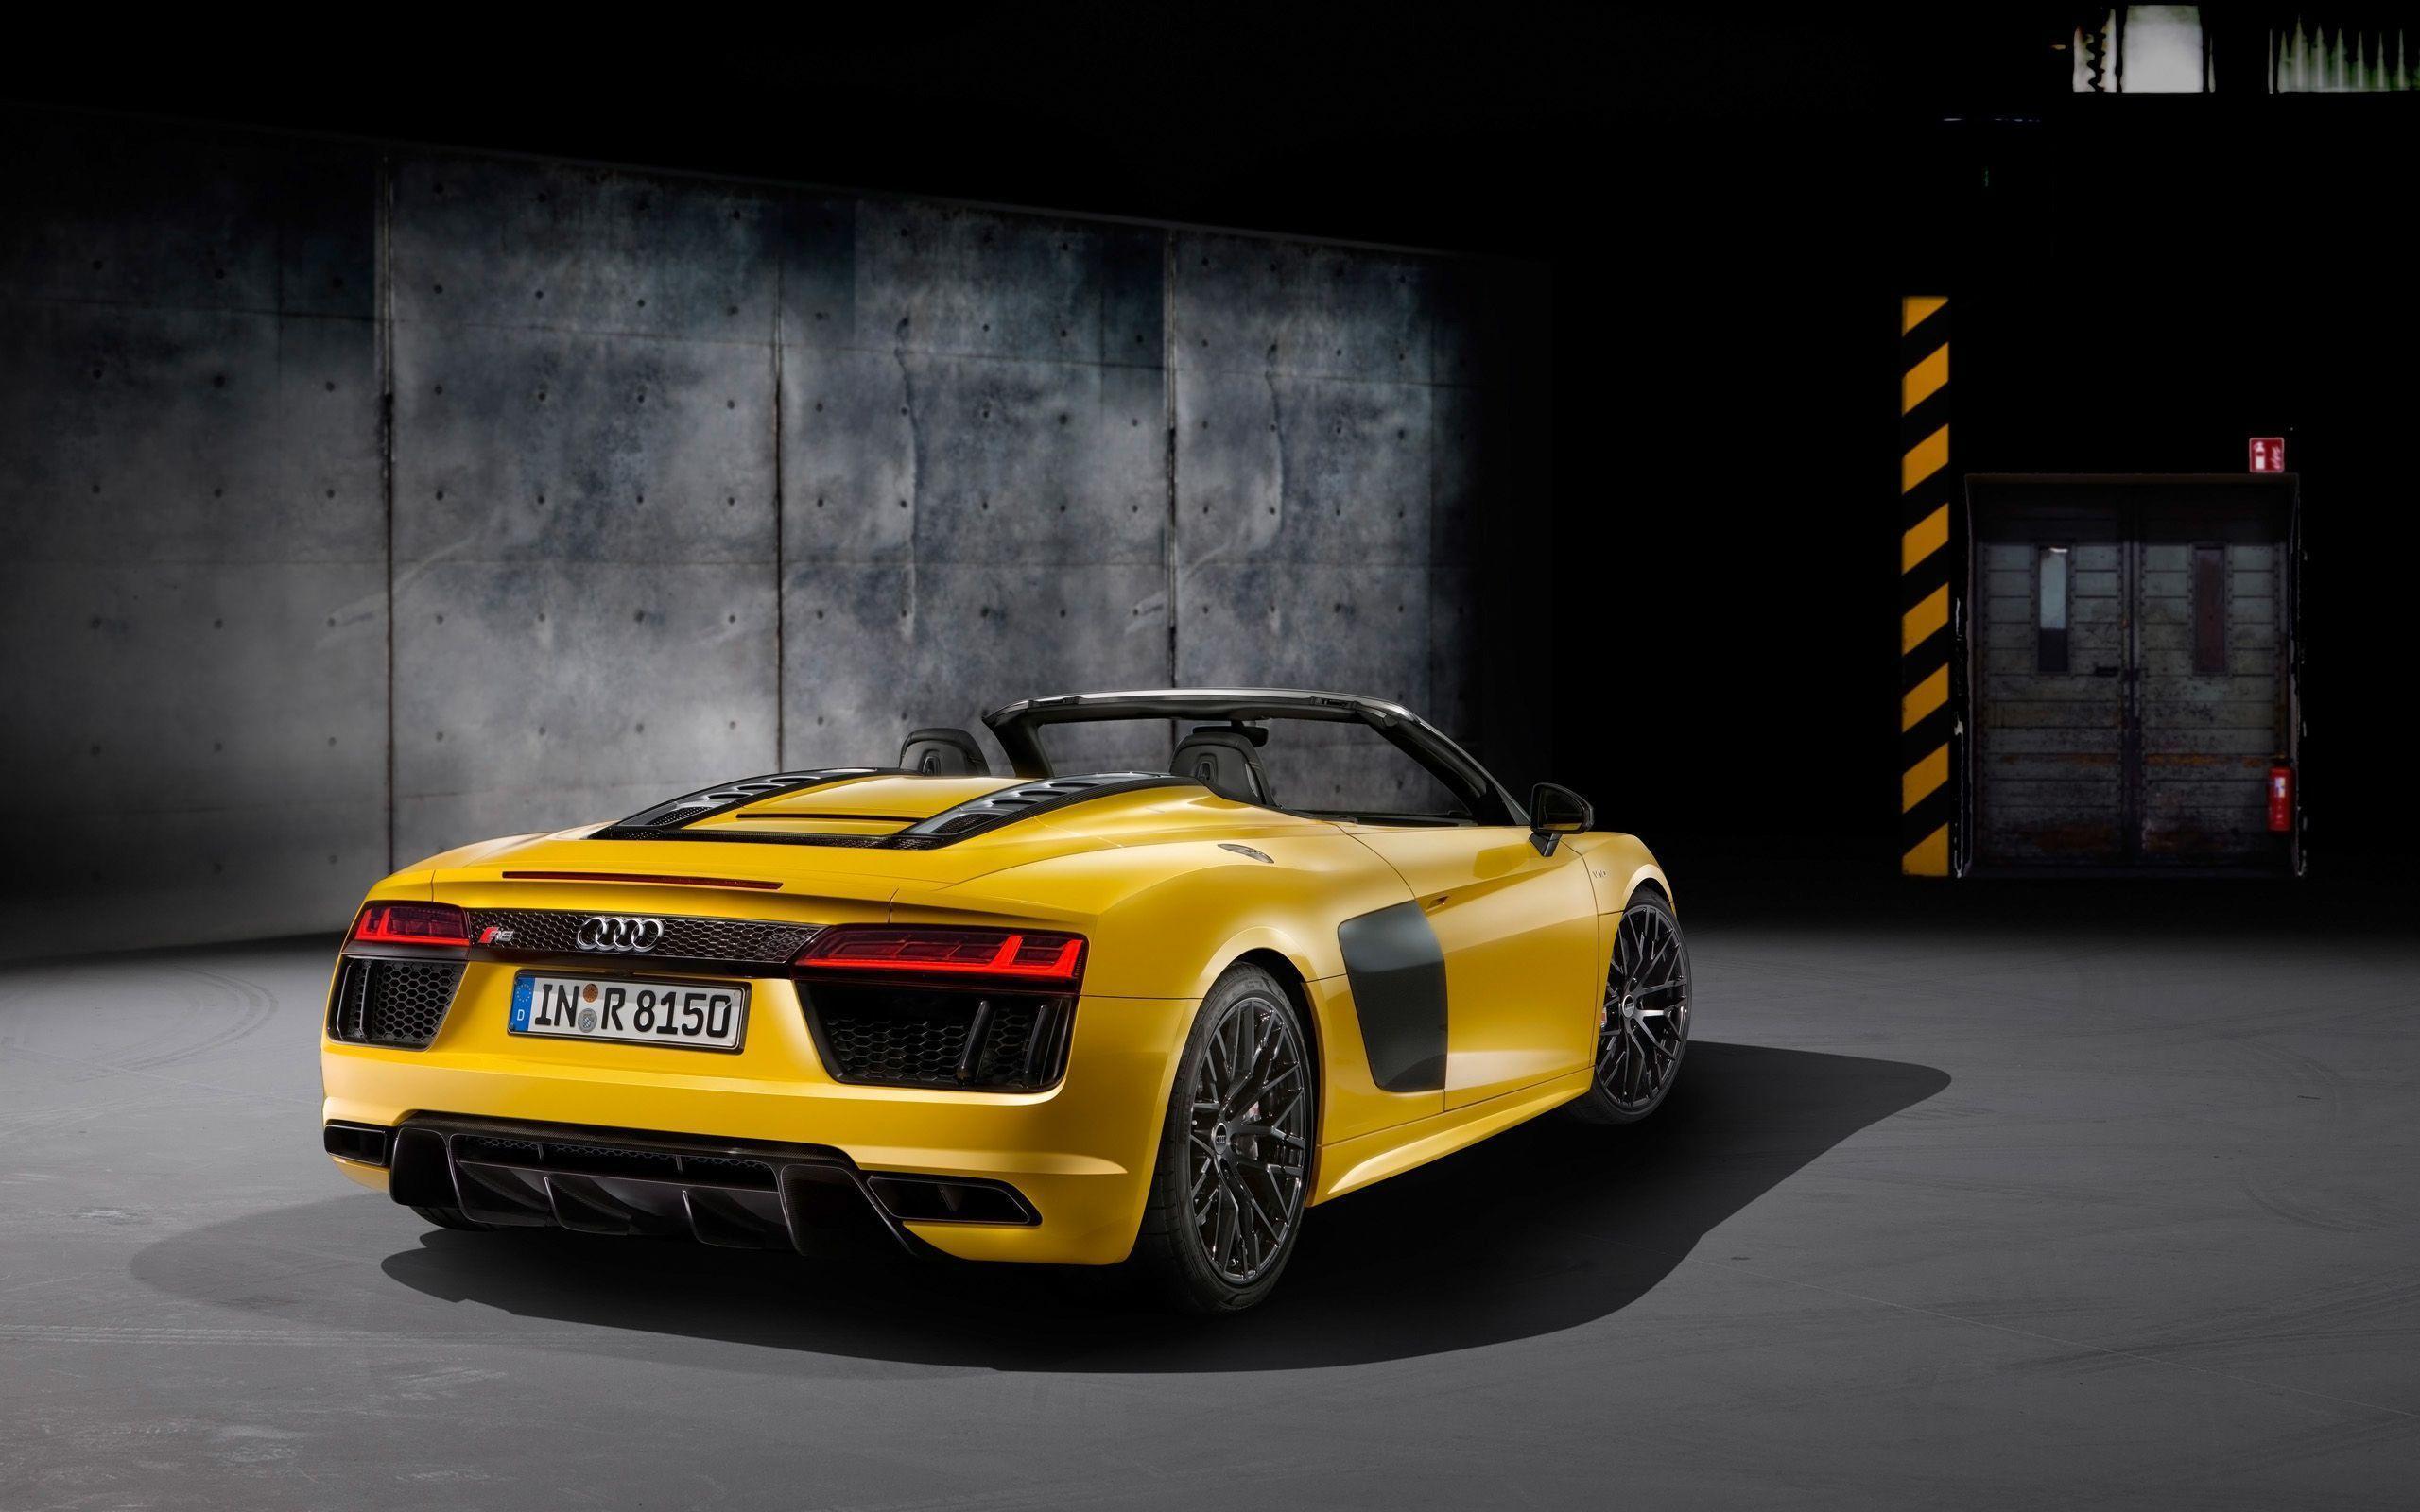 Audi R8 Spyder Wallpapers Top Free Audi R8 Spyder Backgrounds Wallpaperaccess